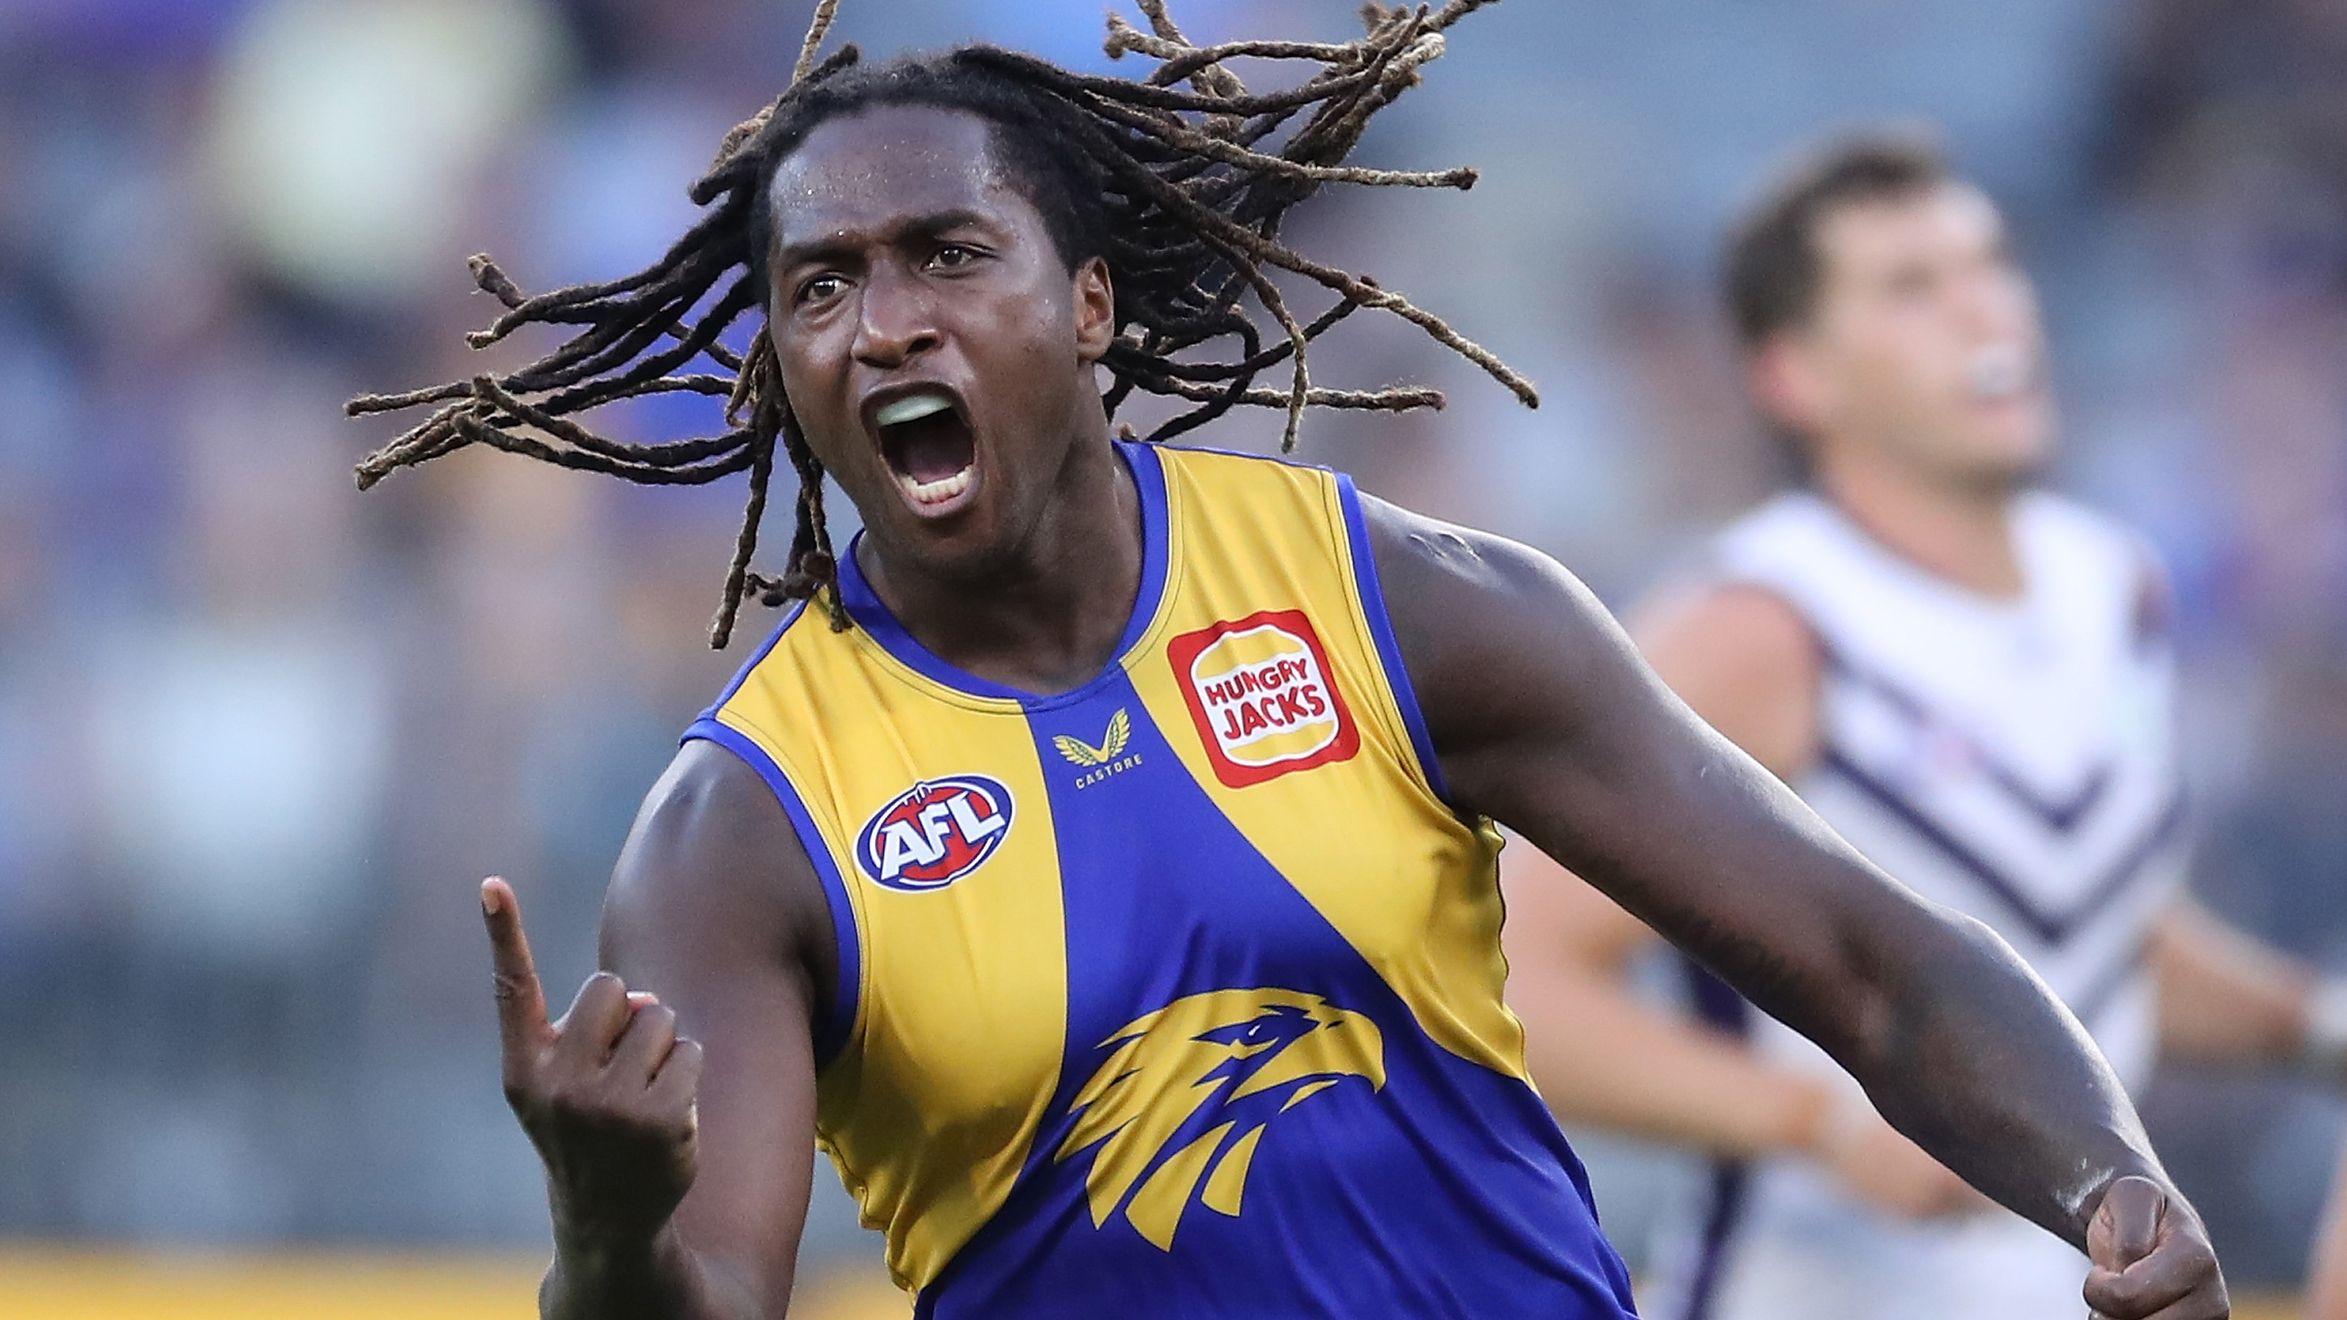 Nic Naitanui of the Eagles celebrates after scoring a goal during the 2022 AFL Round 03 match between the West Coast Eagles and the Fremantle Dockers at Optus Stadium on April 03, 2022 In Perth, Australia. (Photo by Will Russell/AFL Photos)